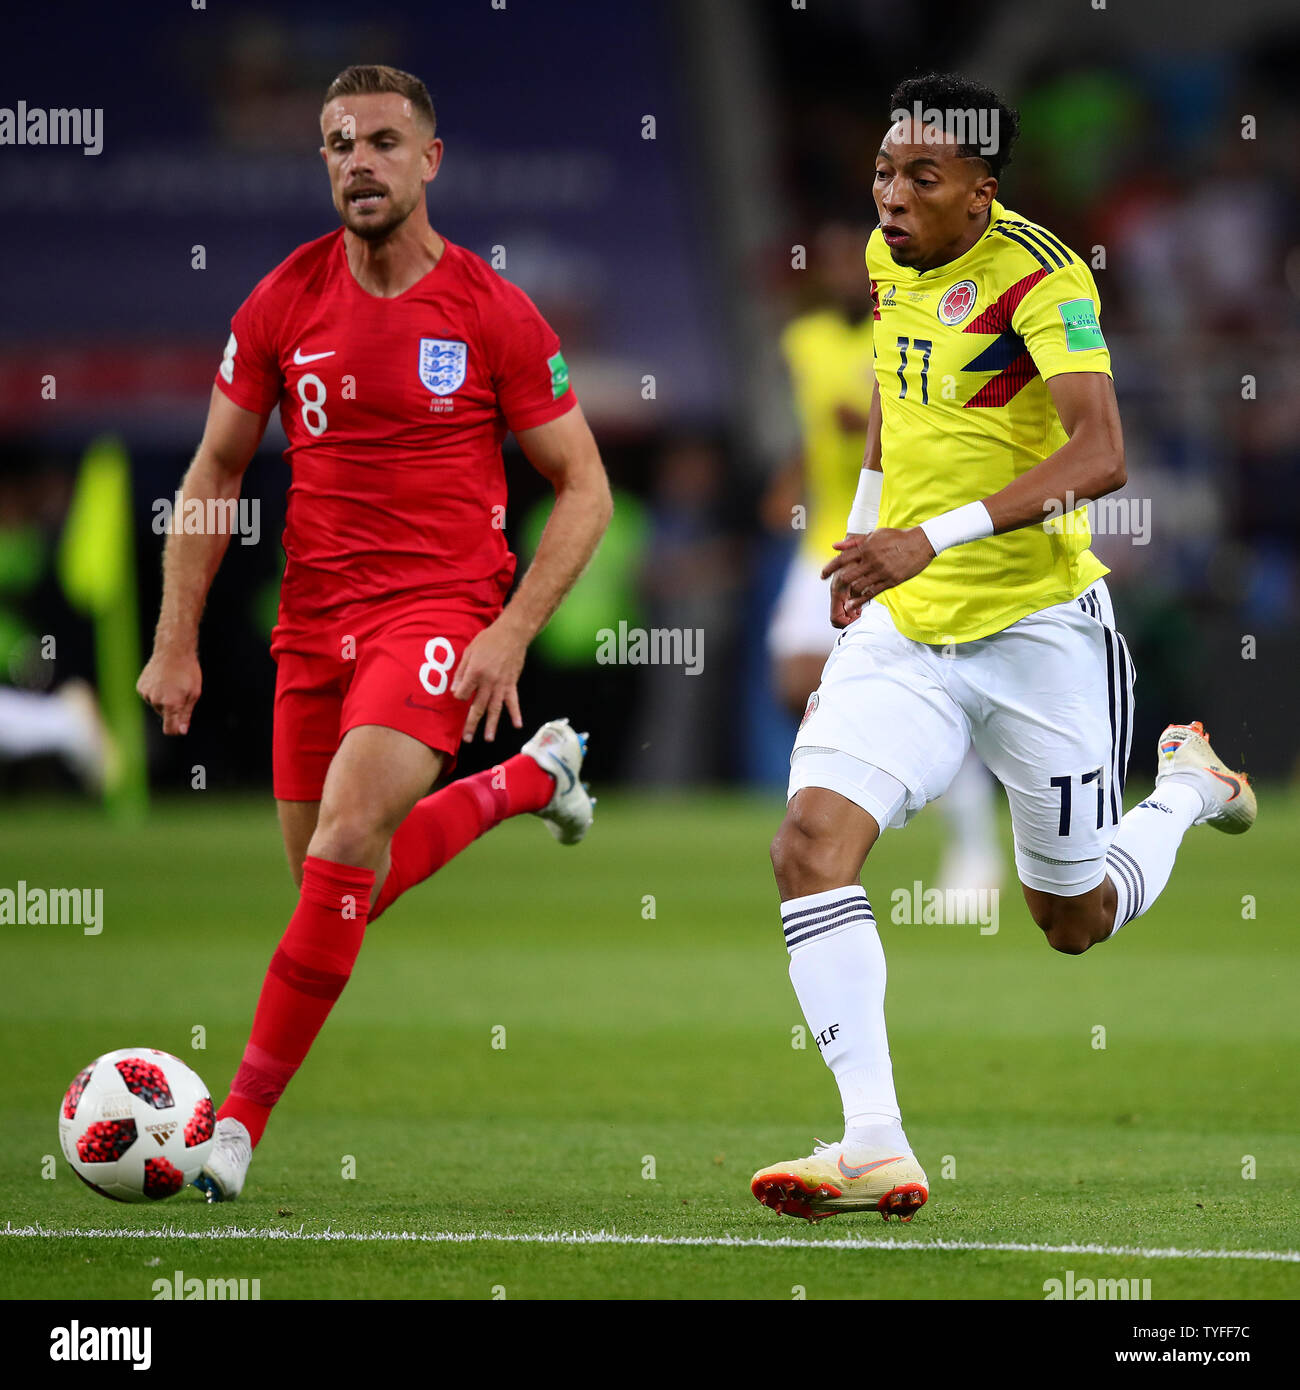 Jordan Henderson (R) of England chases Johan Mojica of Colombia during the 2018 FIFA World Cup Round of 16 match at Spartak Stadium in Moscow, Russia on July 3, 2018. England beat Colombia 4-3 on penalties to qualify for the quarter-finals. Photo by Chris Brunskill/UPI Stock Photo